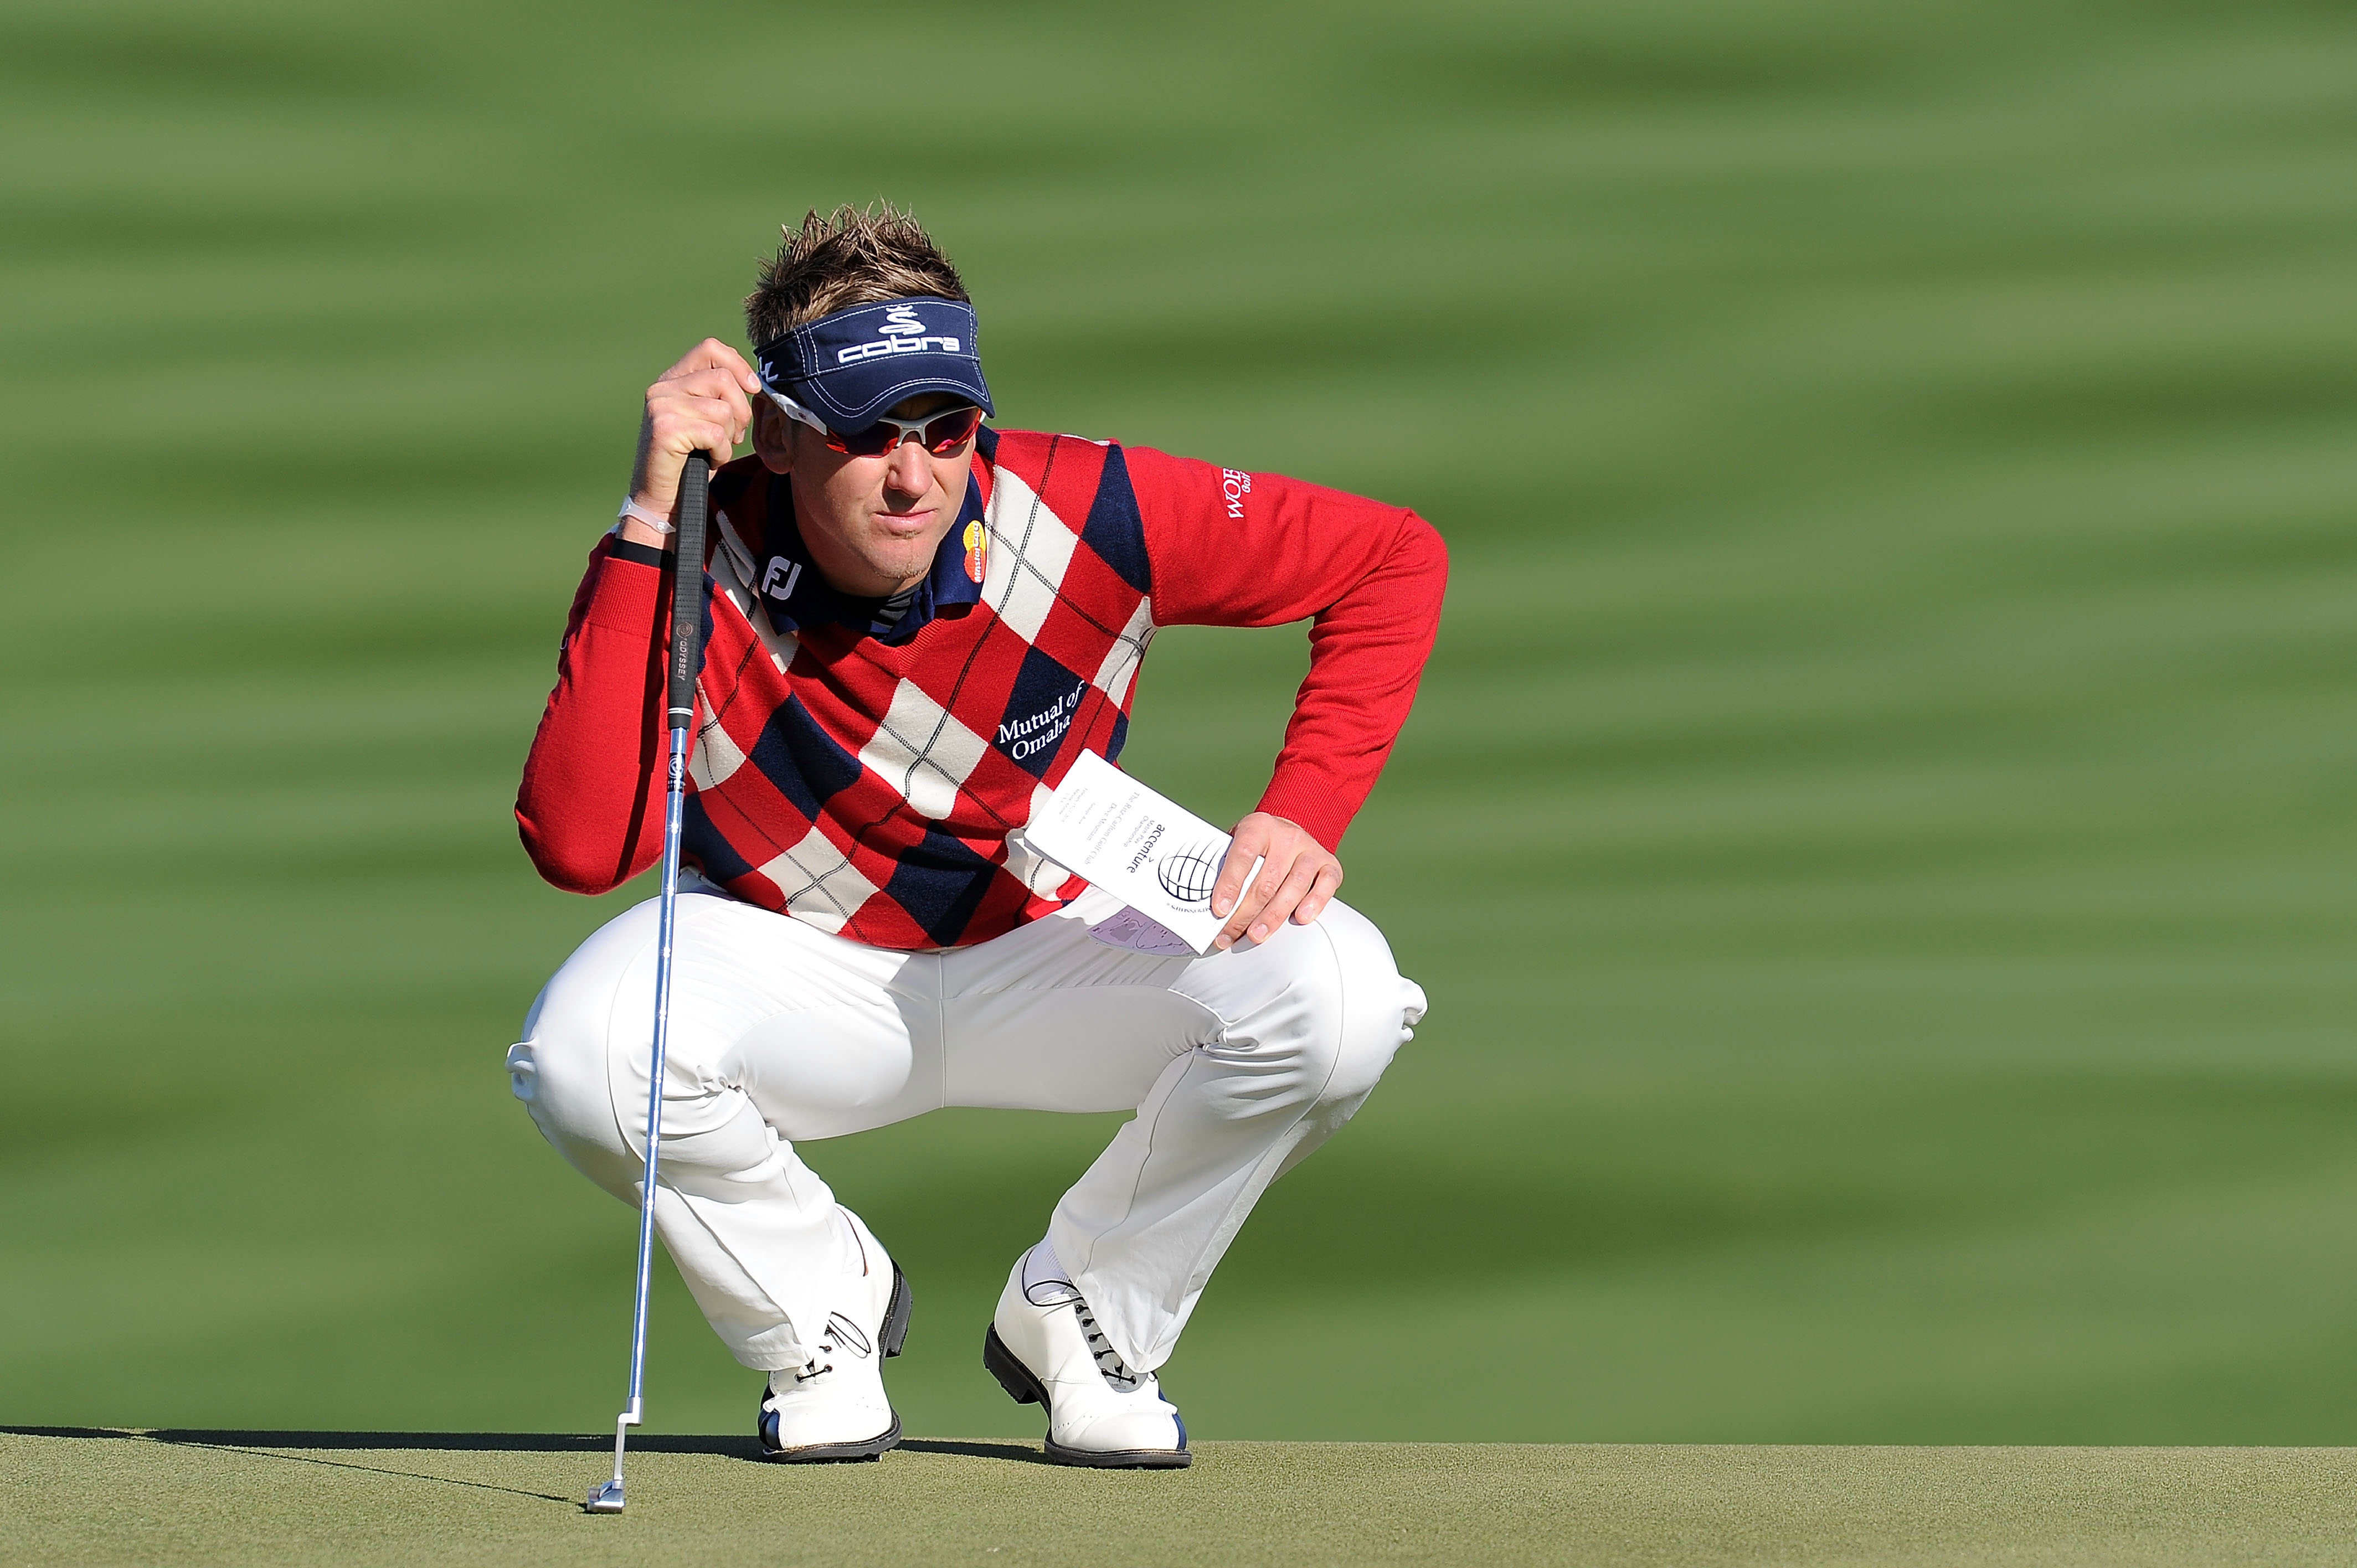 MARANA, AZ - FEBRUARY 23:  Ian Poulter of England looks on during the first round of the Accenture Match Play Championship at the Ritz-Carlton Golf Club on February 23, 2011 in Marana, Arizona.  (Photo by Stuart Franklin/Getty Images)